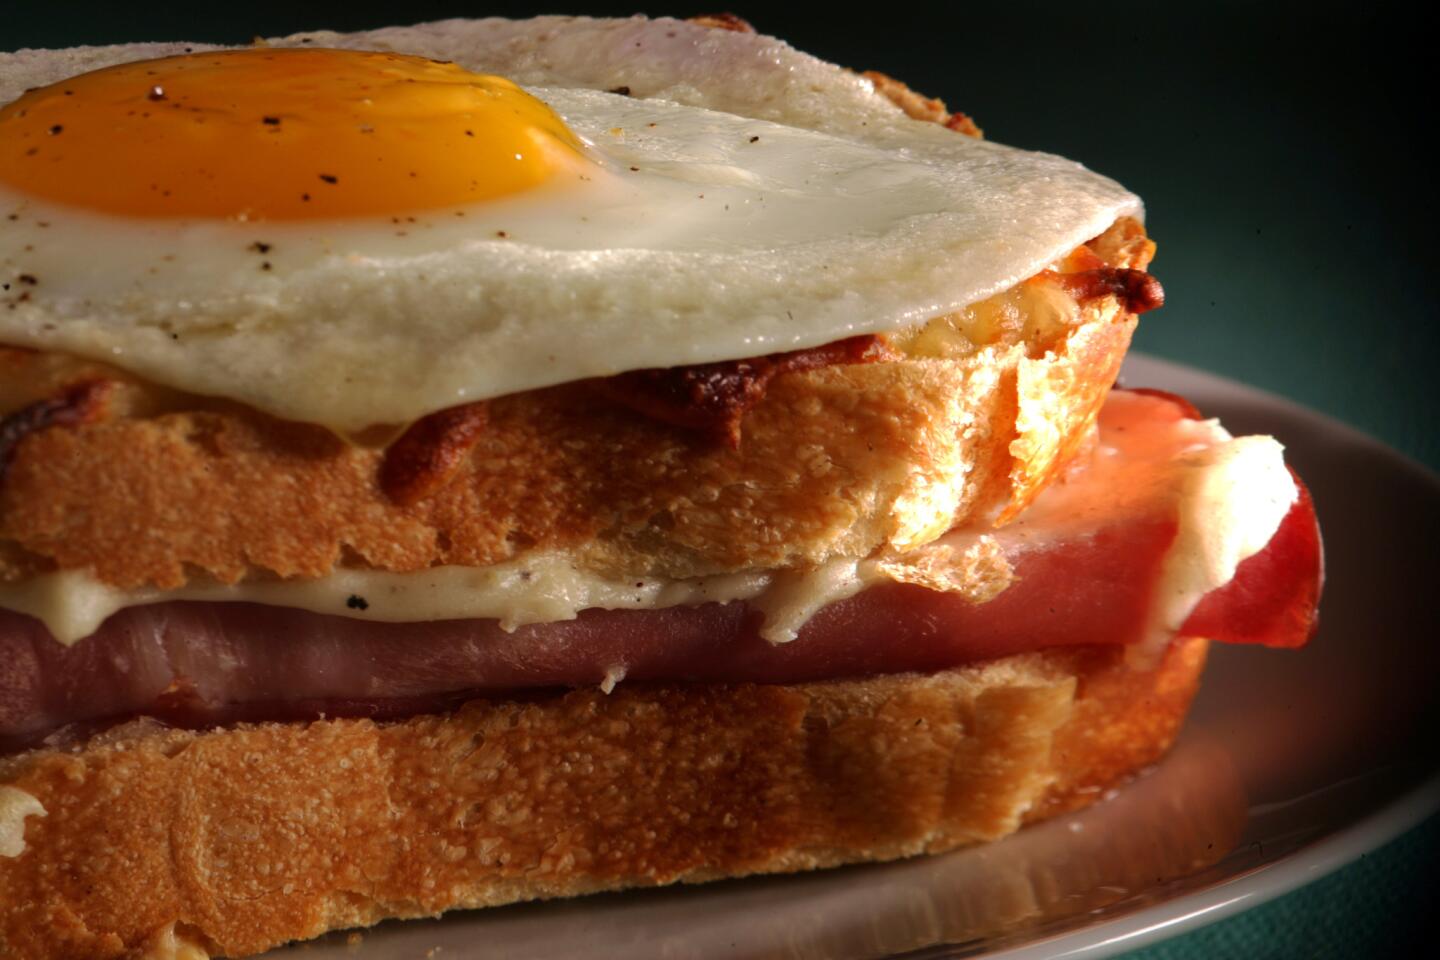 The croque-madame served at La Dijonaise in Culver City features a sunny-side-up egg on top. It's an accent that separates the croque-madame from the croque-monsieur.